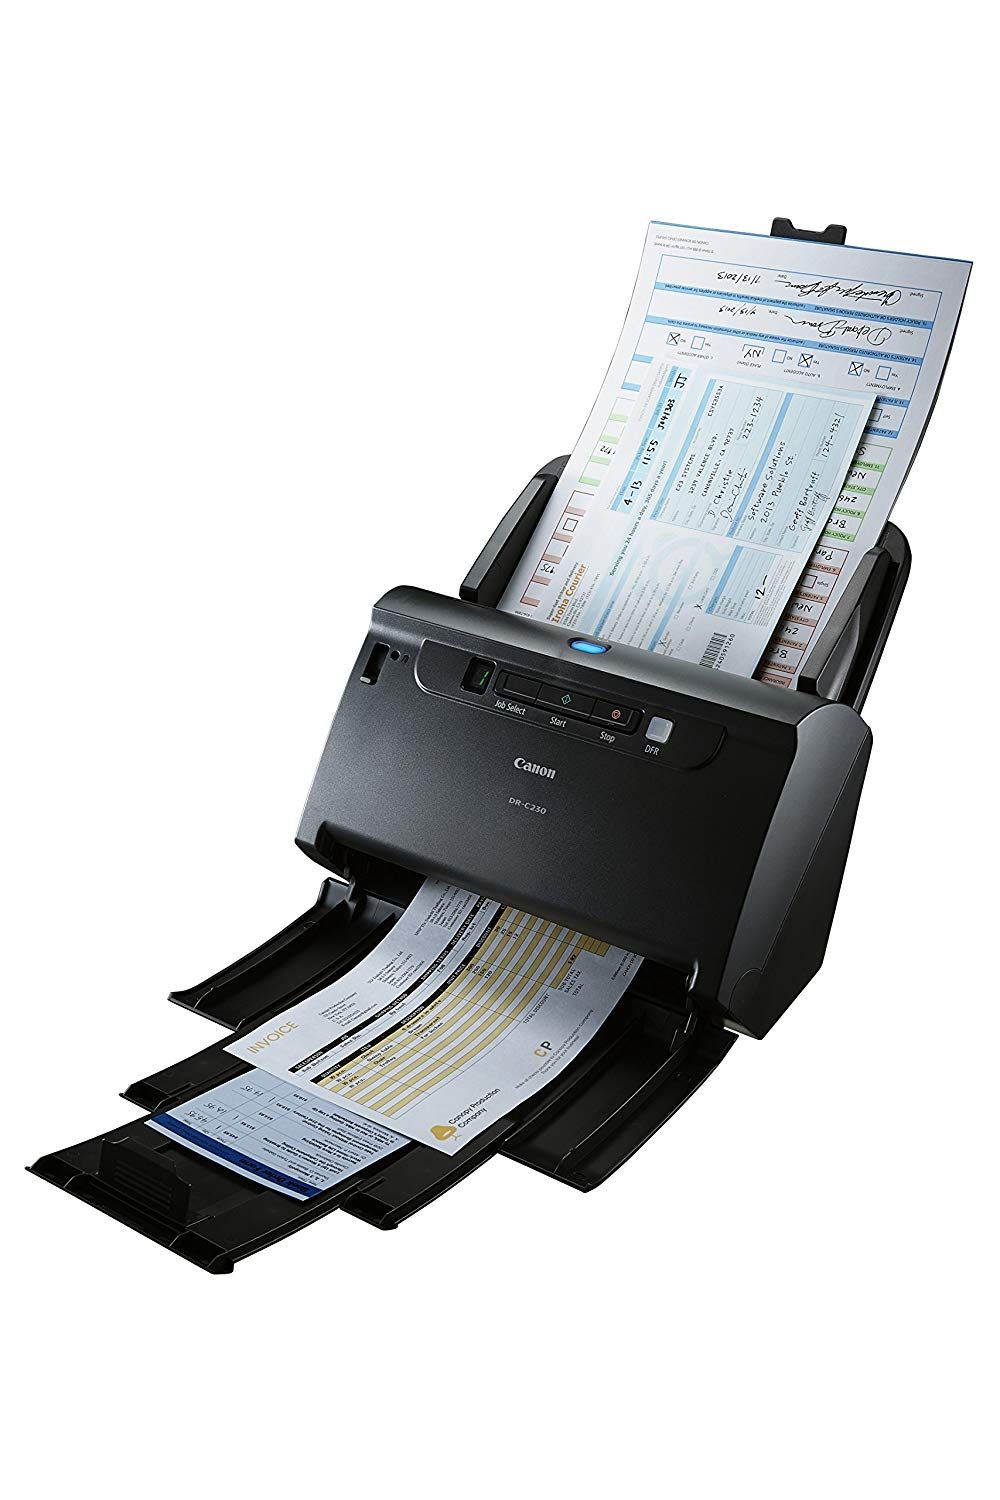 Scanner Epson DS-530II, dimensiune A4, tip sheetfed, viteza scanare: 70 ipm alb-negru si color, rezolutie optica 600x600dpi, ADF Single Pass 50 pagini, duplex, senzor CCD, Scan to Email, Scan to FTP, Scan to Microsoft SharePoint®, Scan to Print, Scan to Web folders, Scan to Network folders, JPEG_2